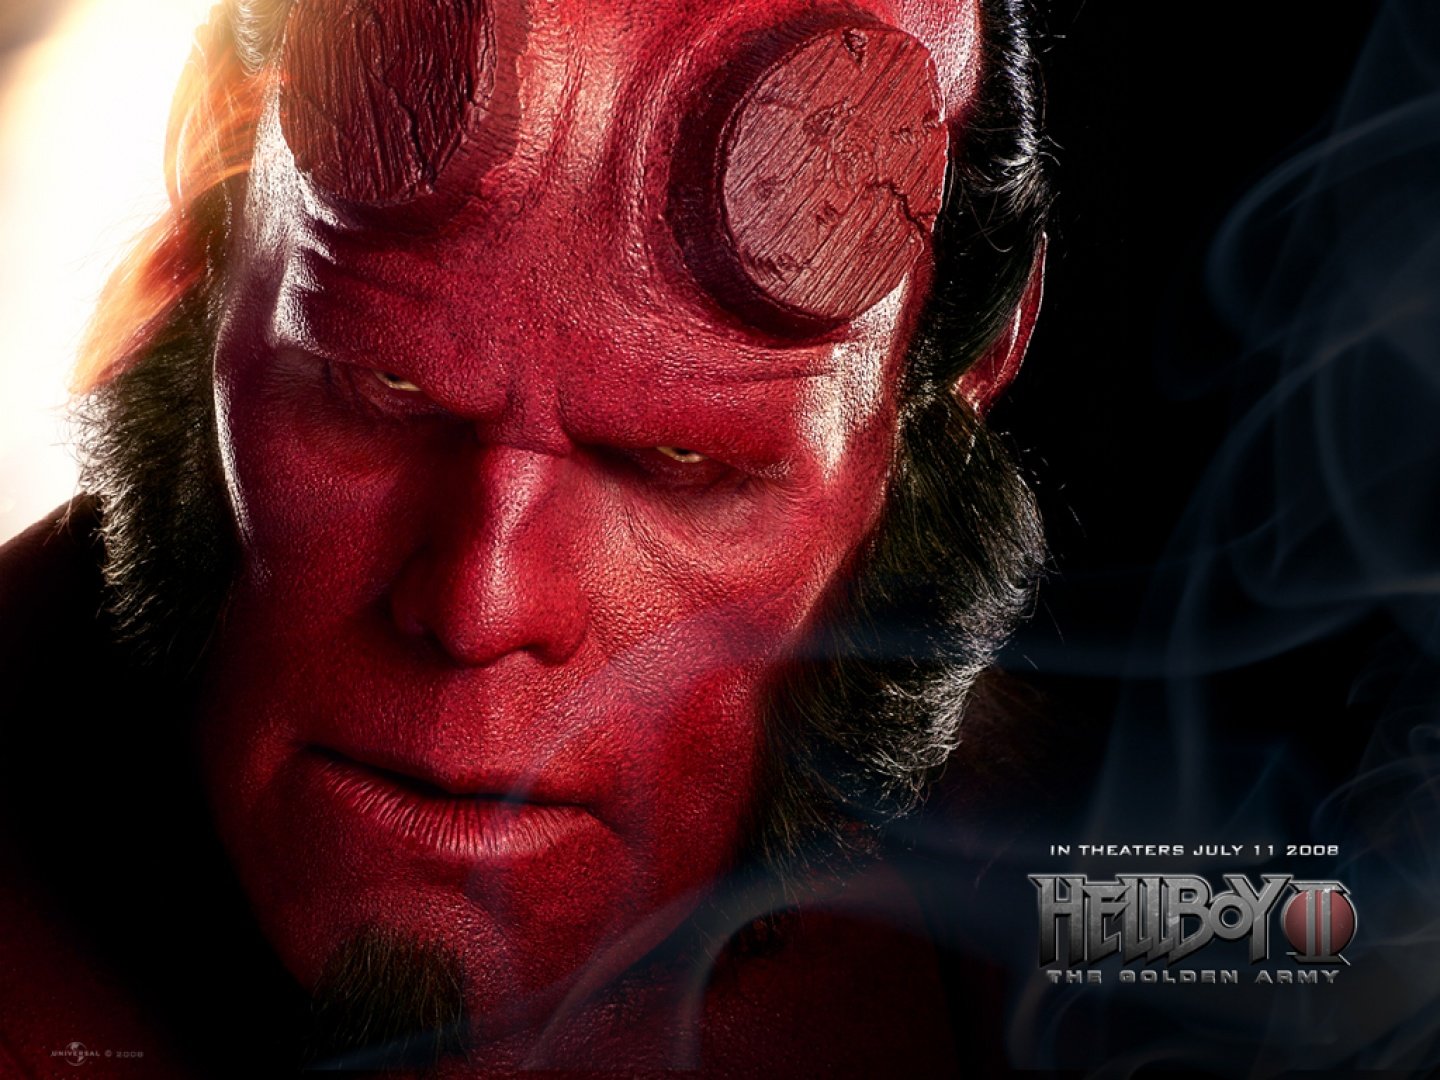 Download hd 1440x1080 Hellboy II: The Golden Army desktop background ID:242379 for free